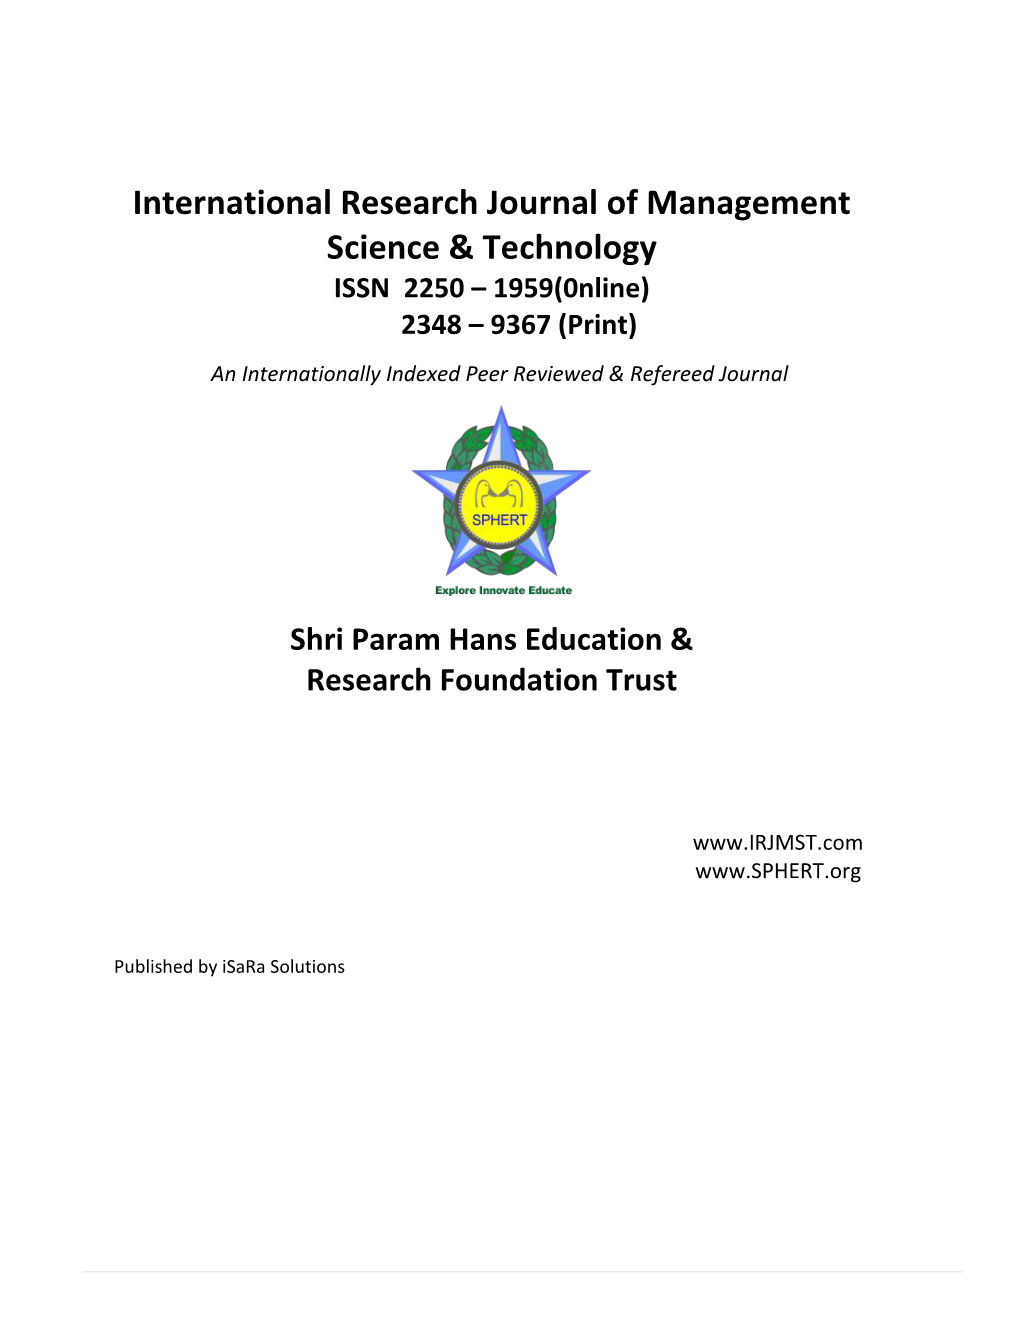 International Research Journal of Management Science